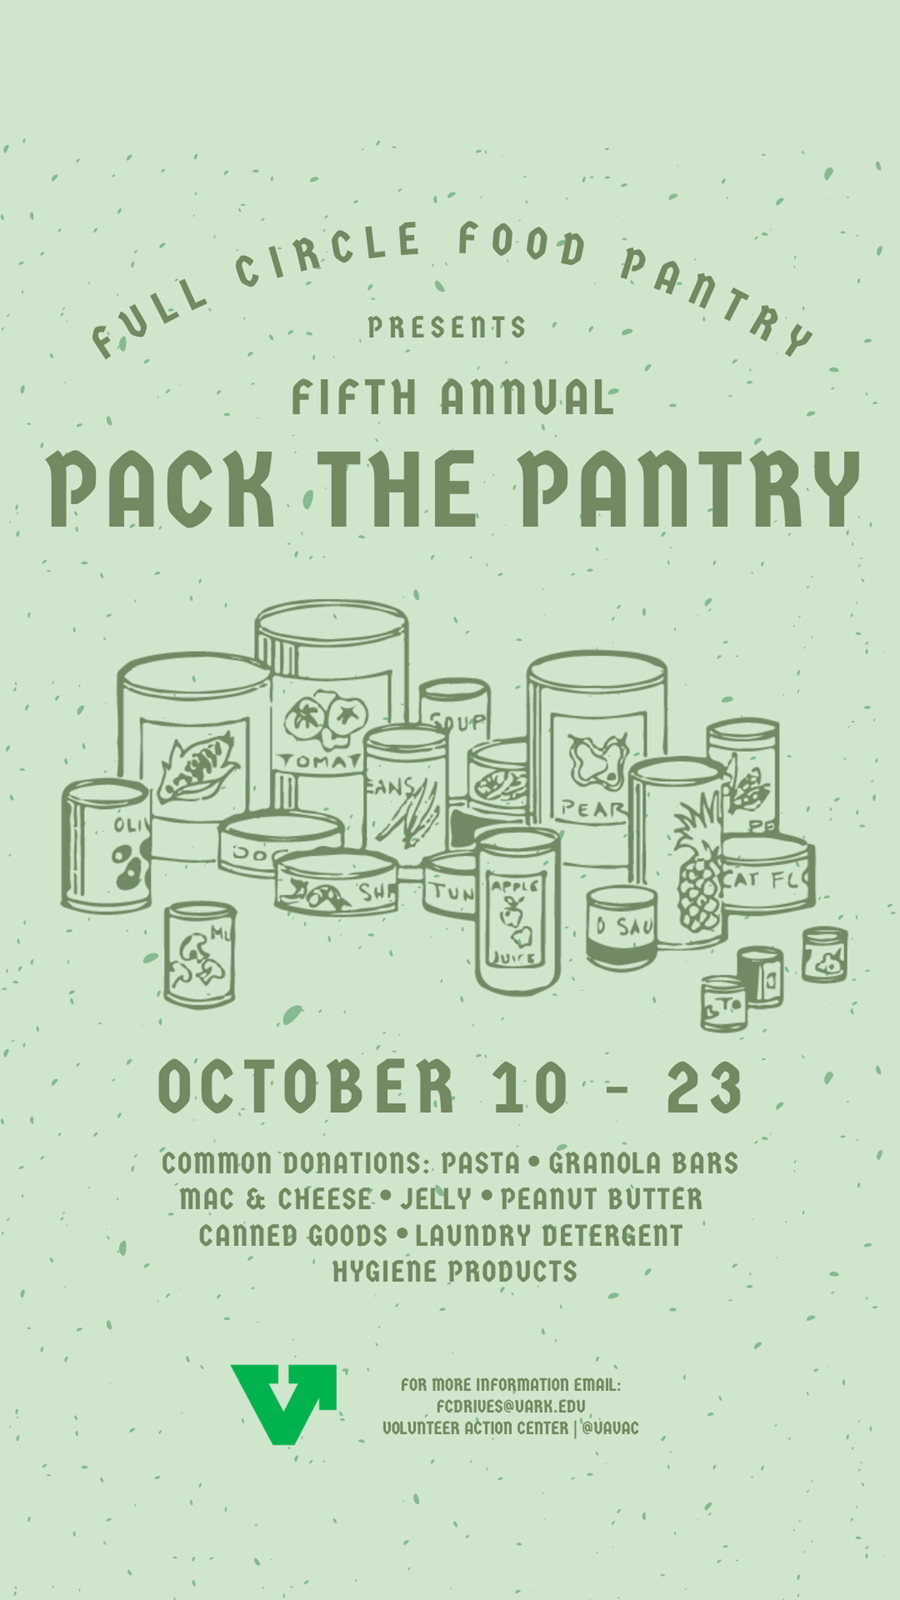 Full Circle Food Pantry Kicks Off Fifth Annual Pack the Pantry Homecoming Food Drive